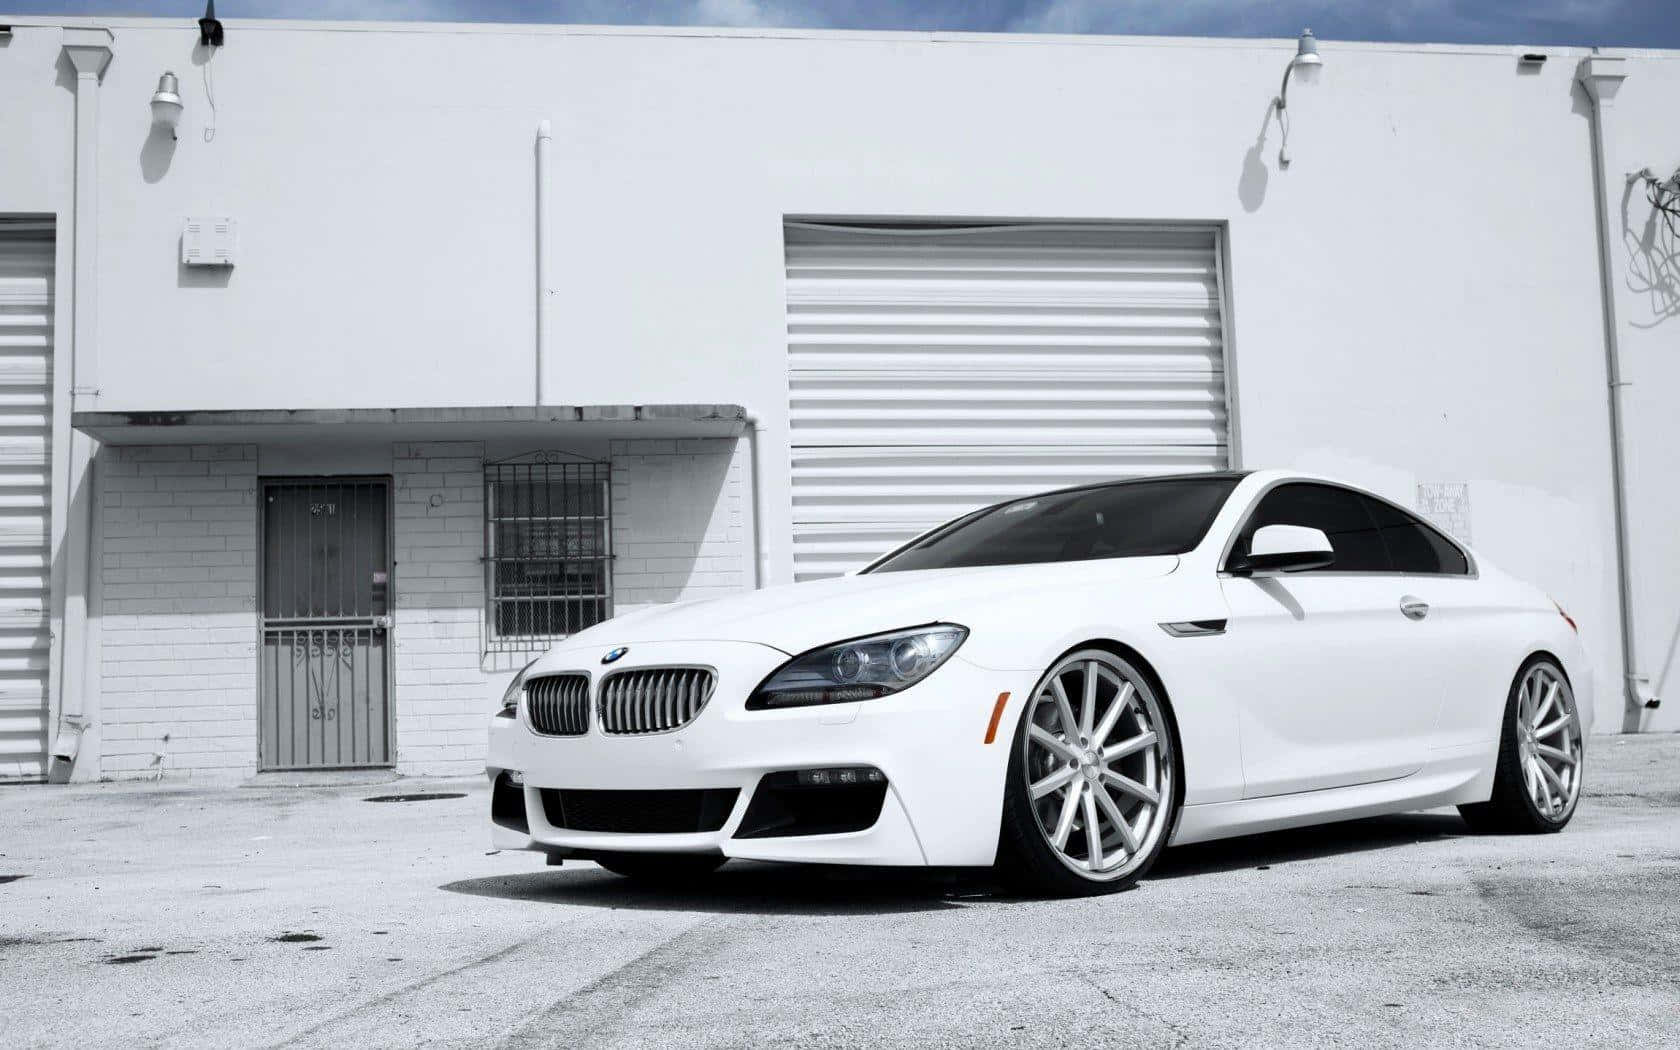 Sleek and Stylish BMW 6 Series in Action Wallpaper